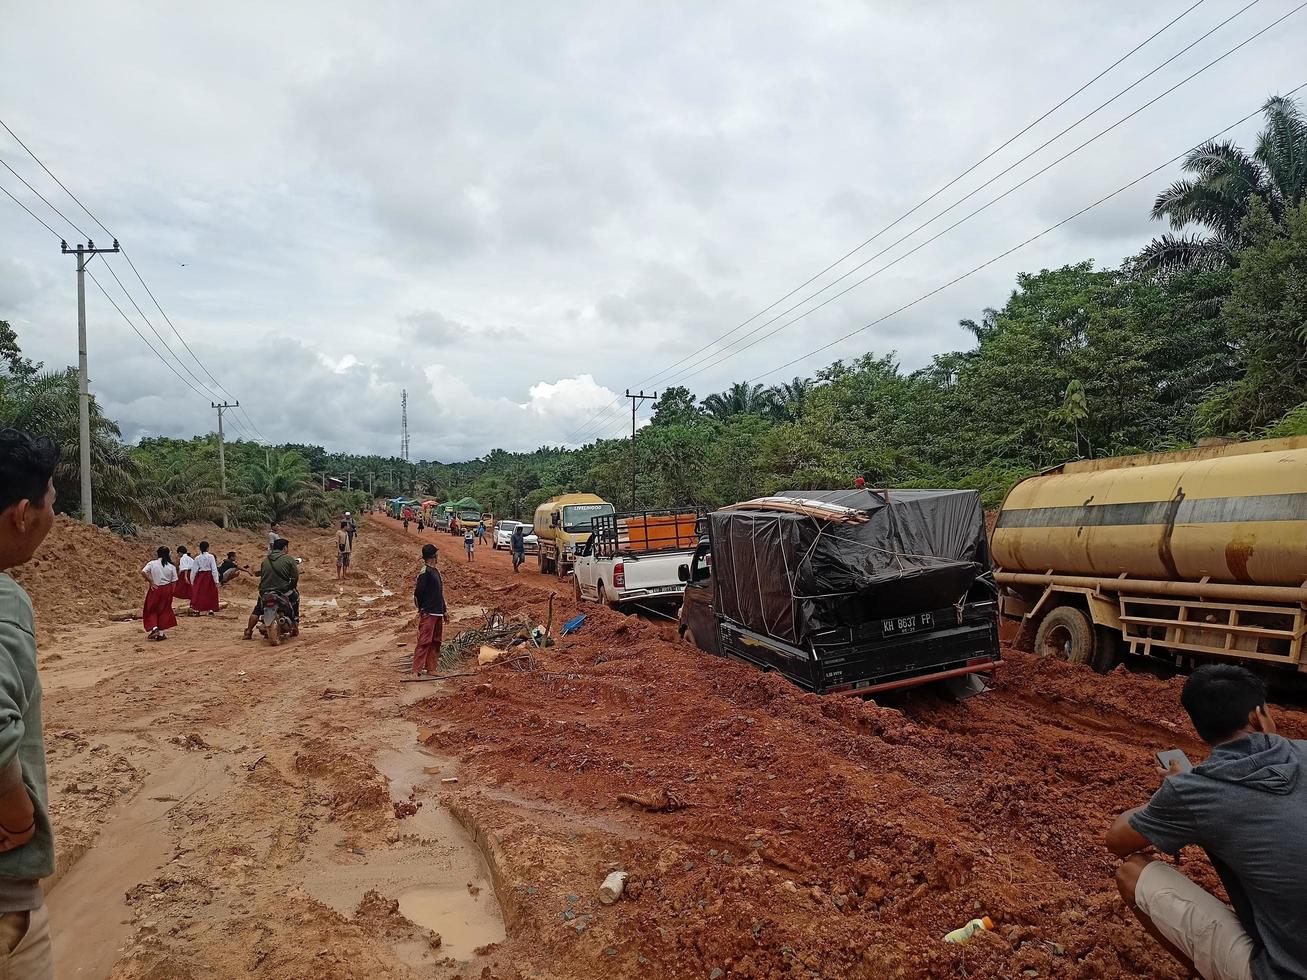 Photo of damaged laterite roads resulting in long queues of heavily loaded vehicles.